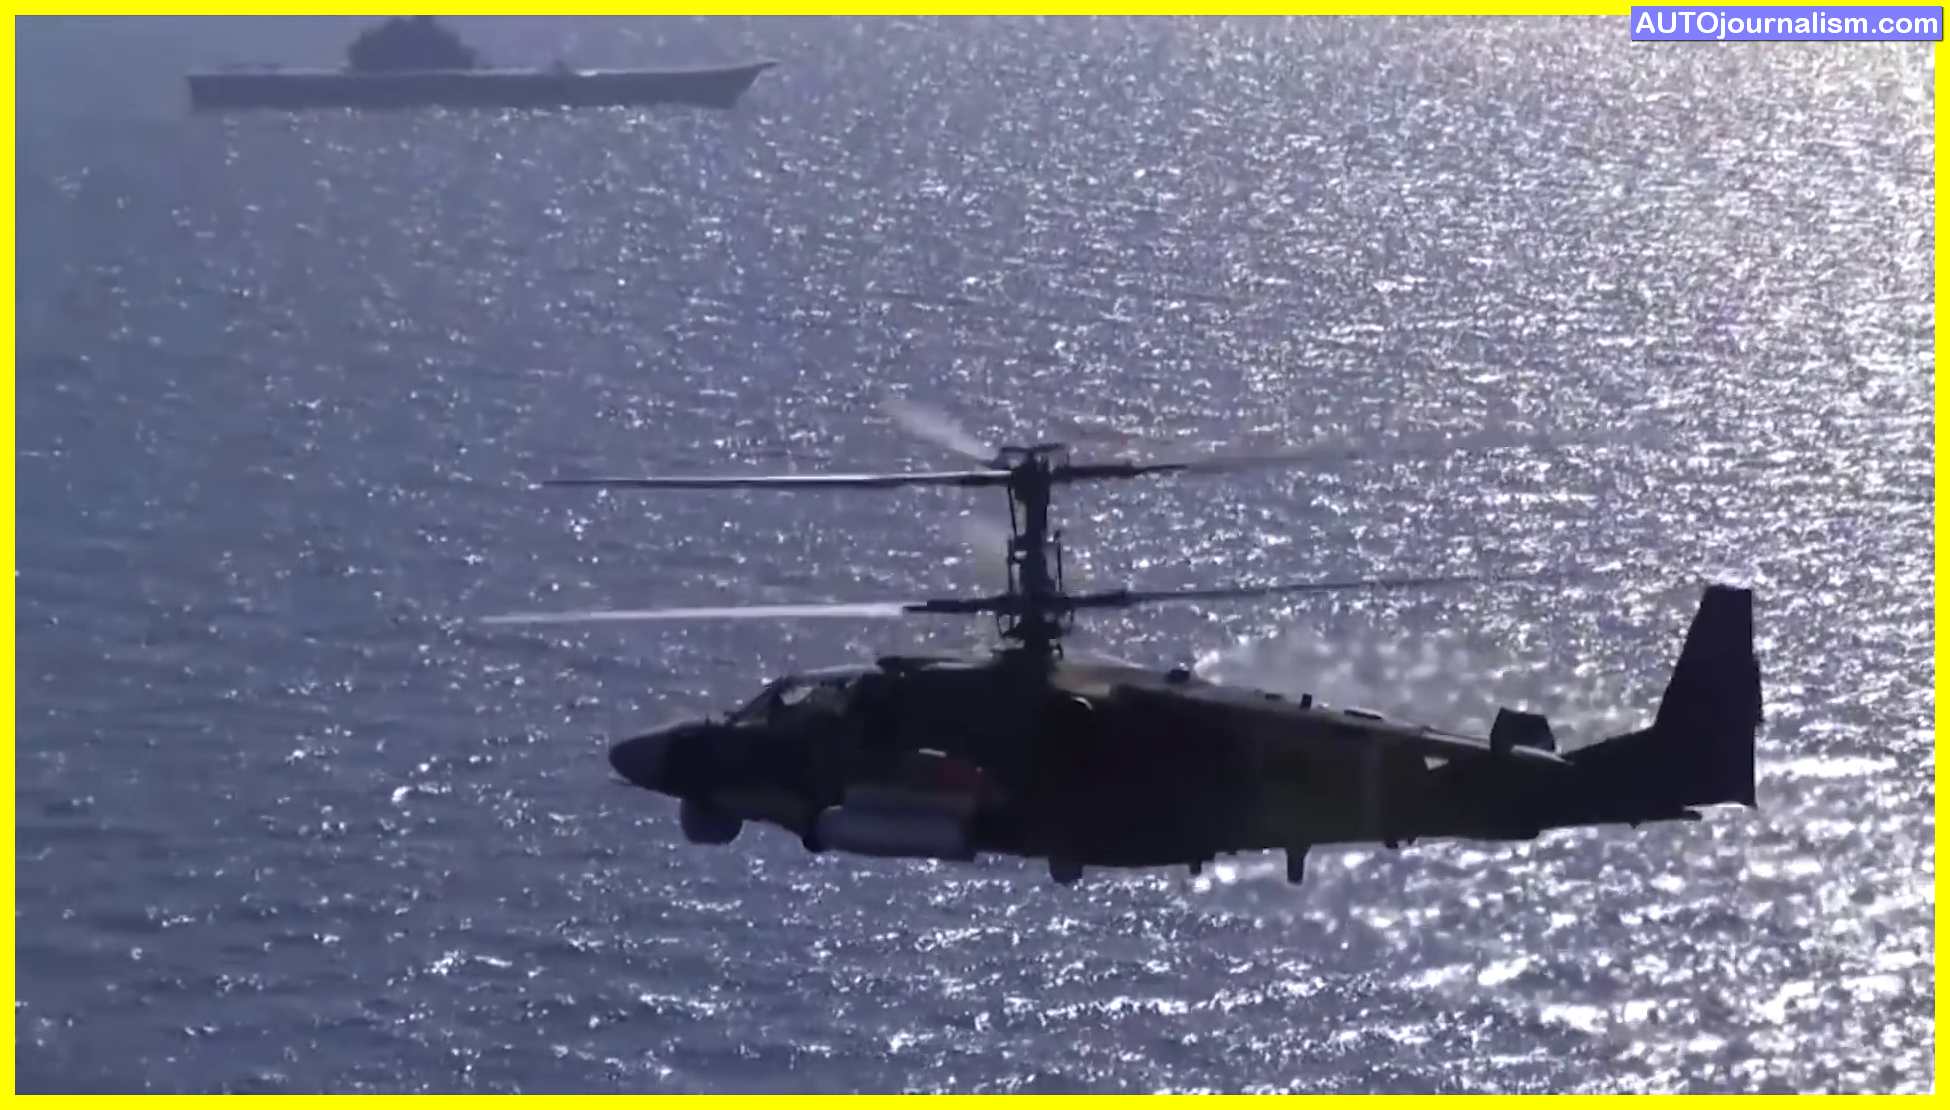 Top-10-Best-Naval-Helicopters-In-The-World